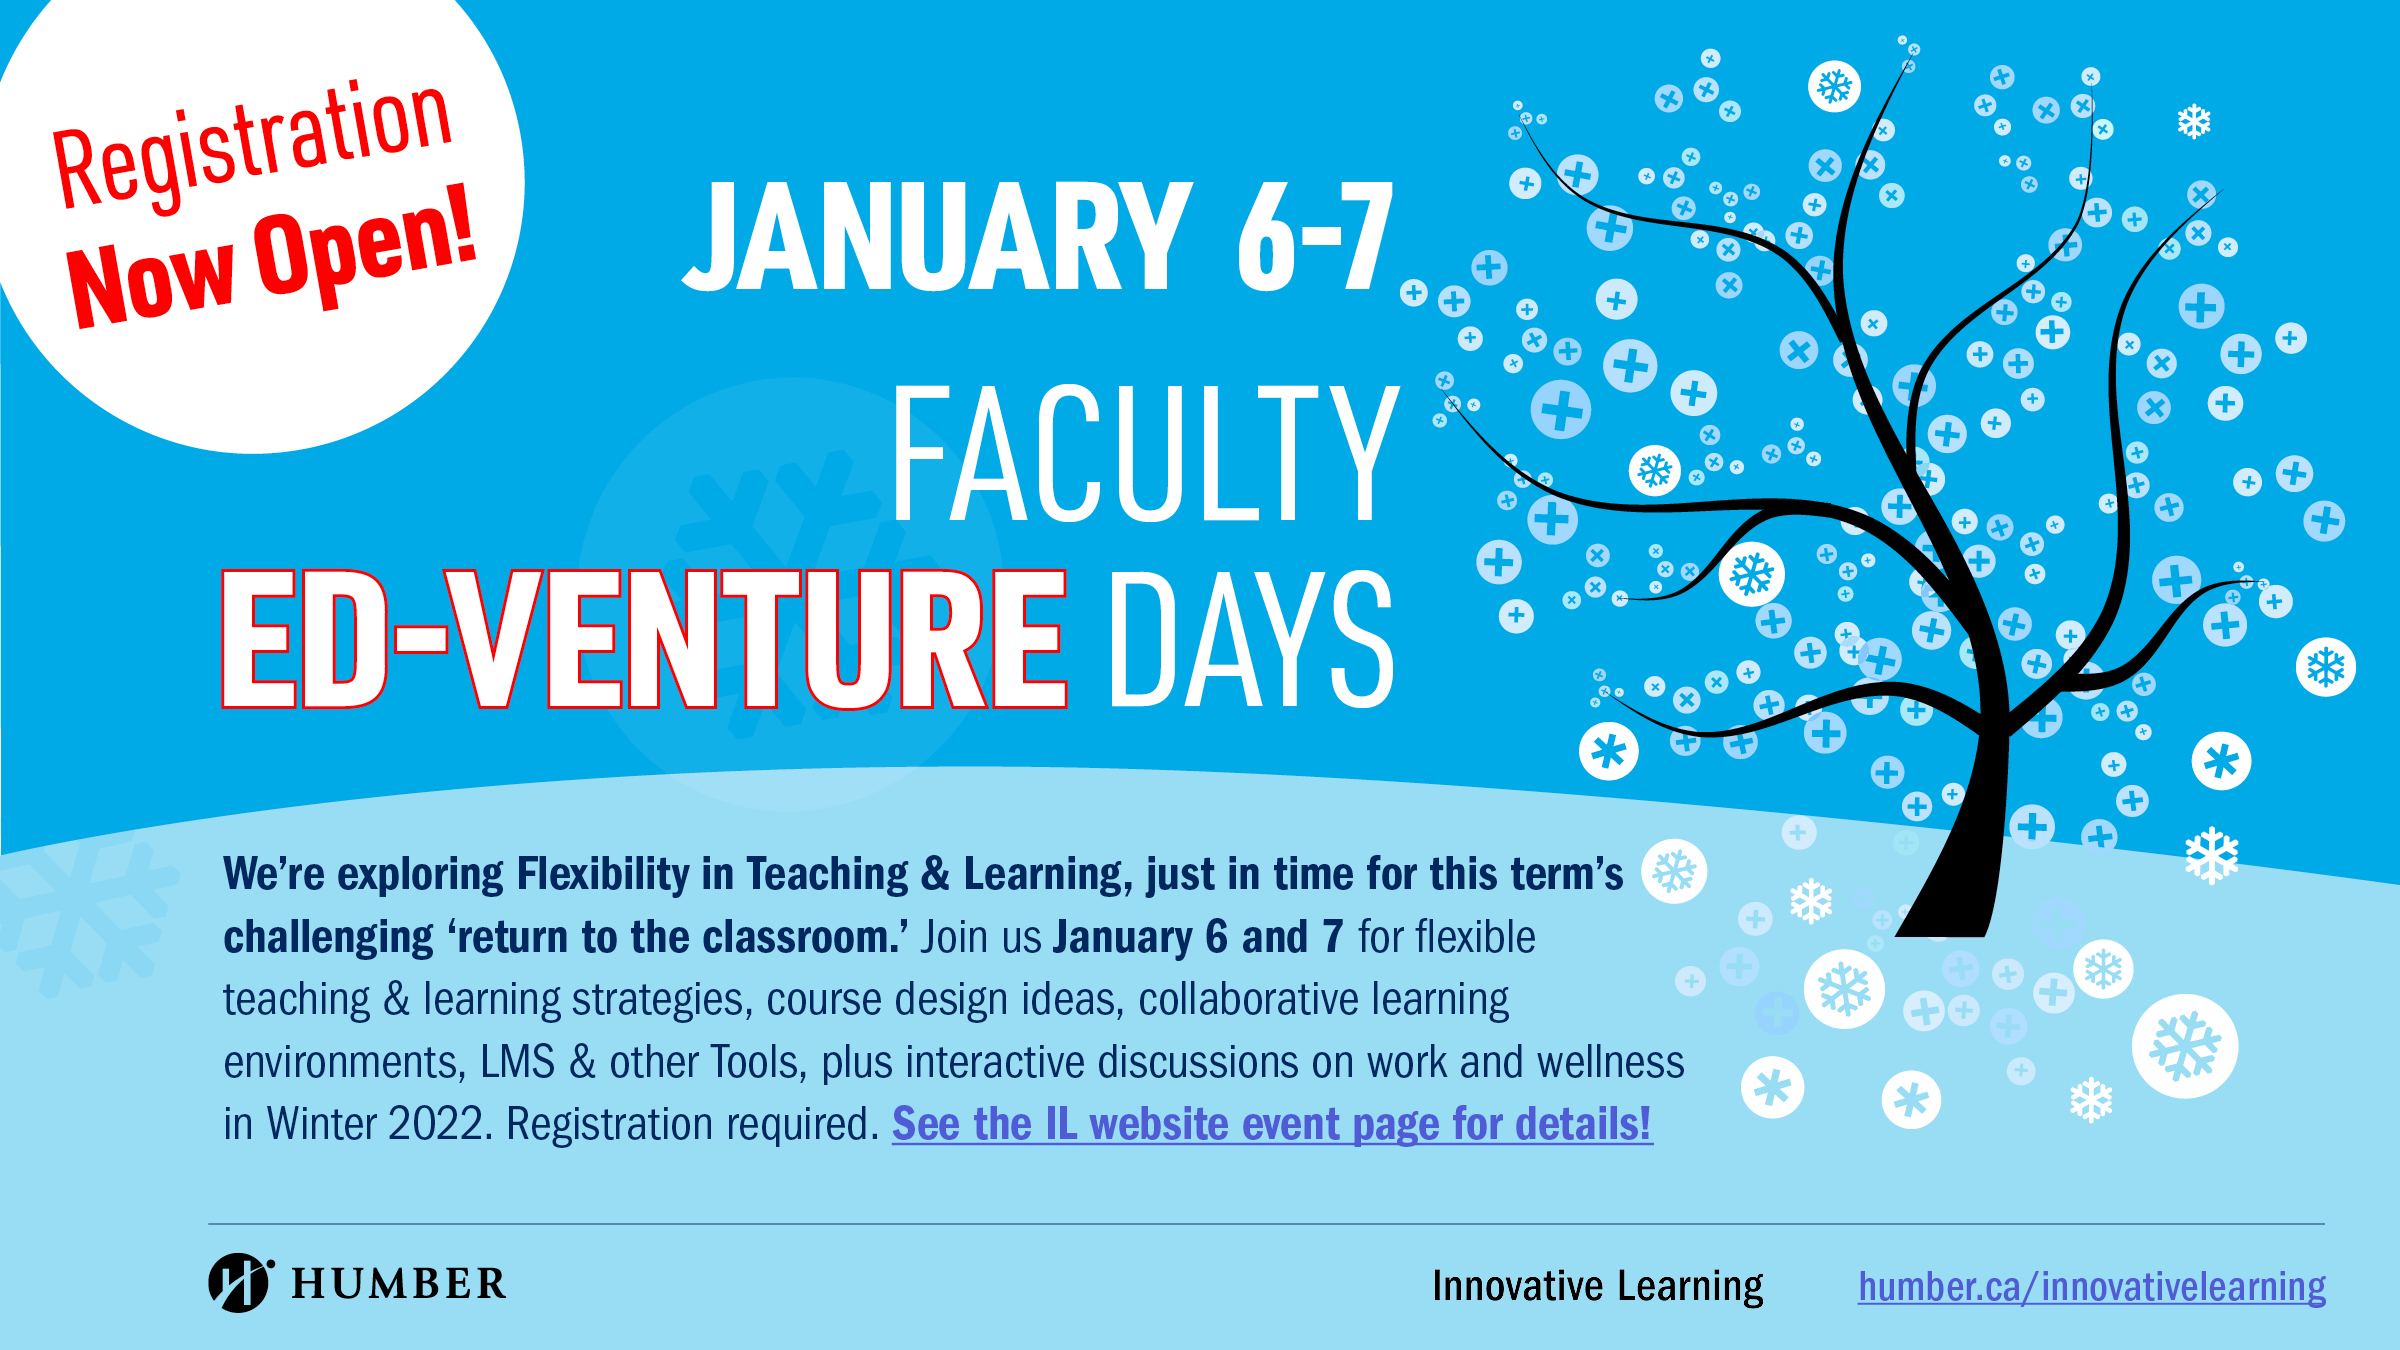 Registration Now Open: Faculty ED-Venture Days - January 6-7, 2022